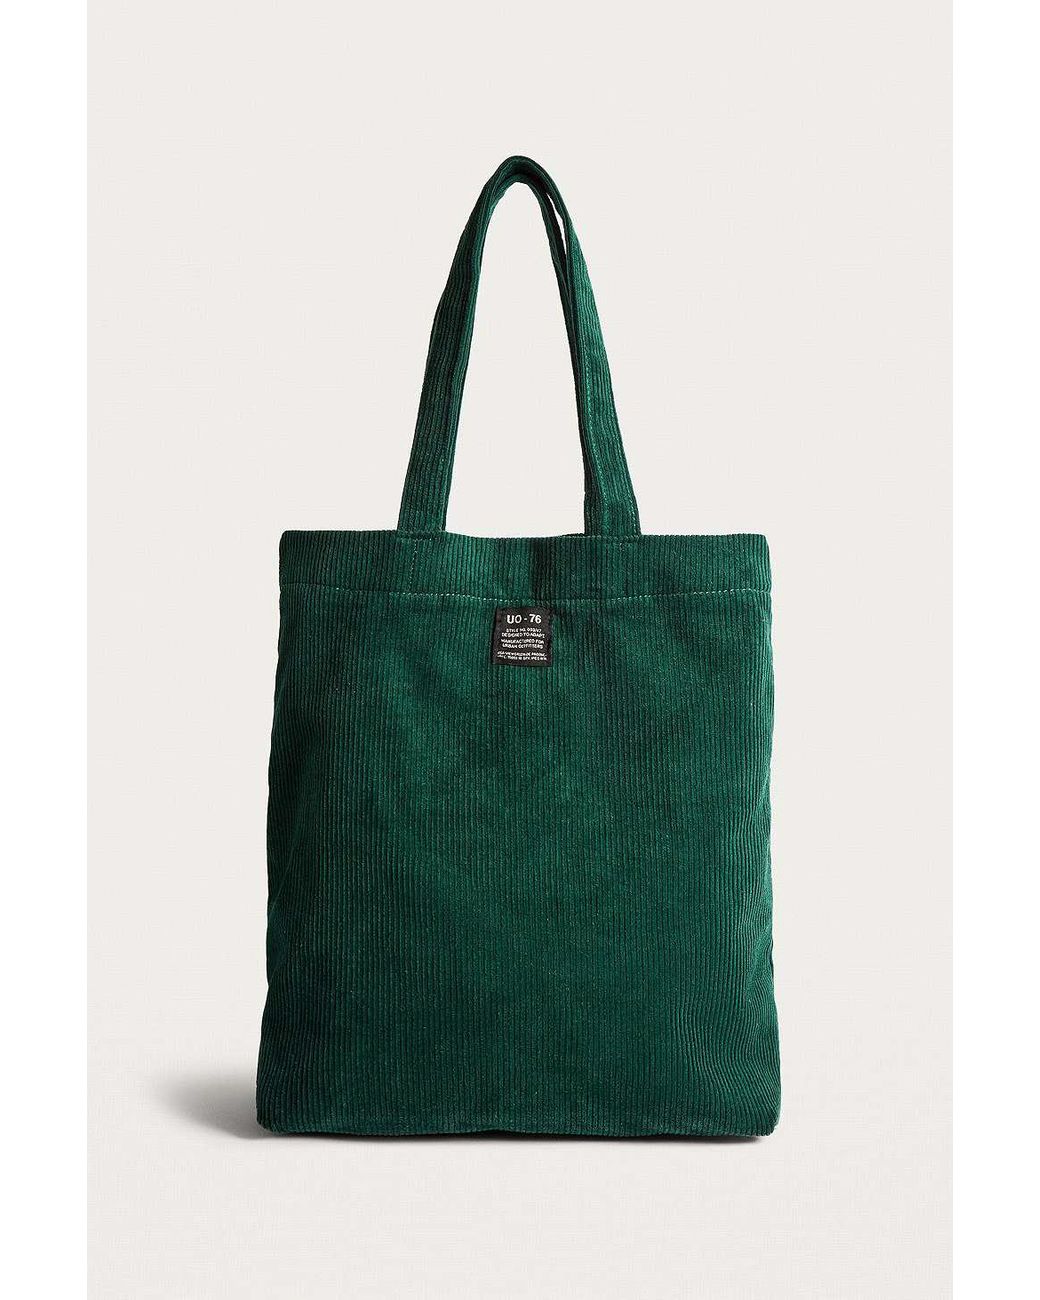 Urban Outfitters Uo Corduroy Tote Bag in Green | Lyst UK